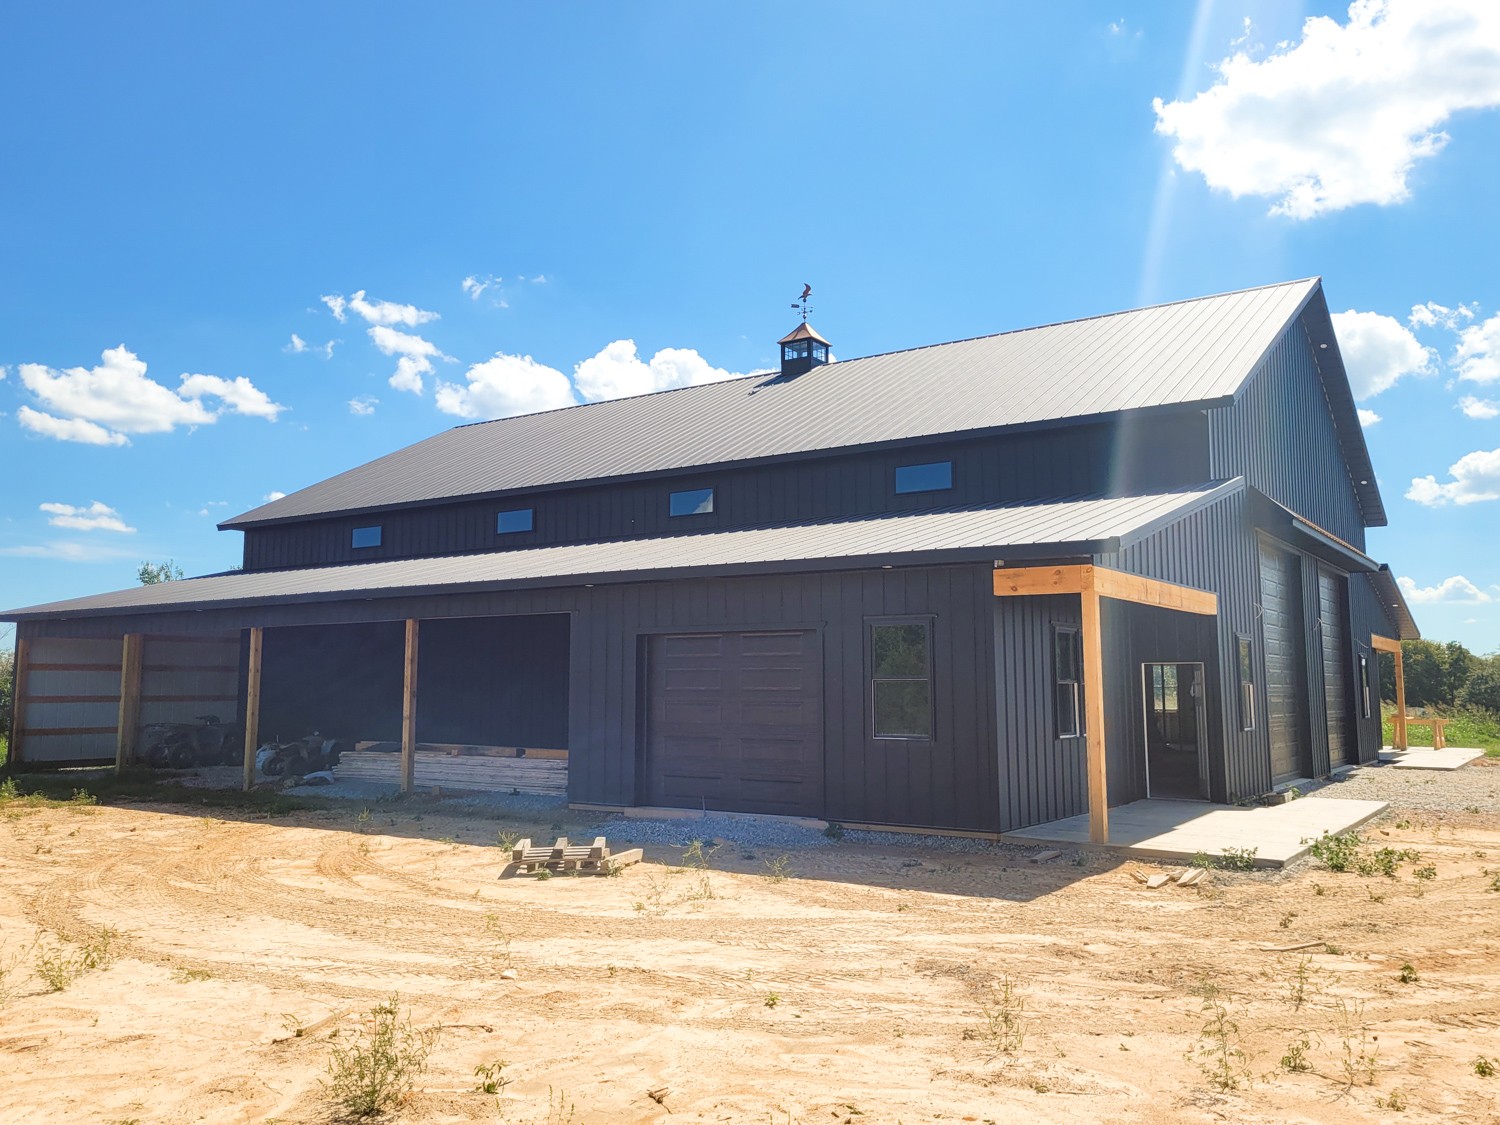 Barndominium with metal siding and roofing in northwest arkansas